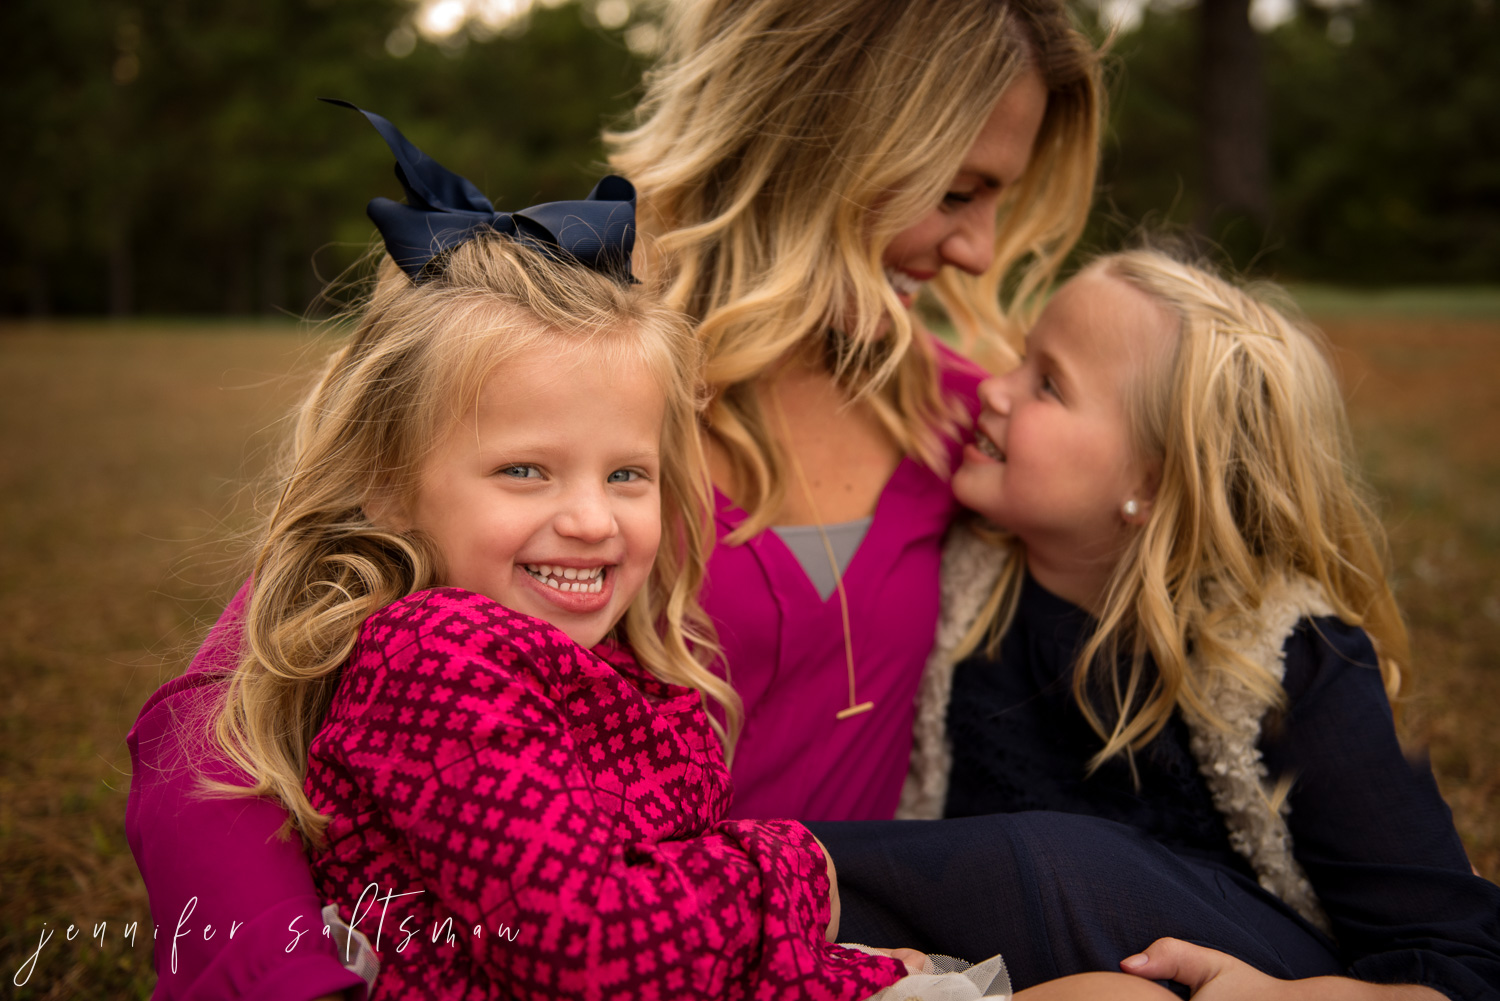 Collierville Family Photographer